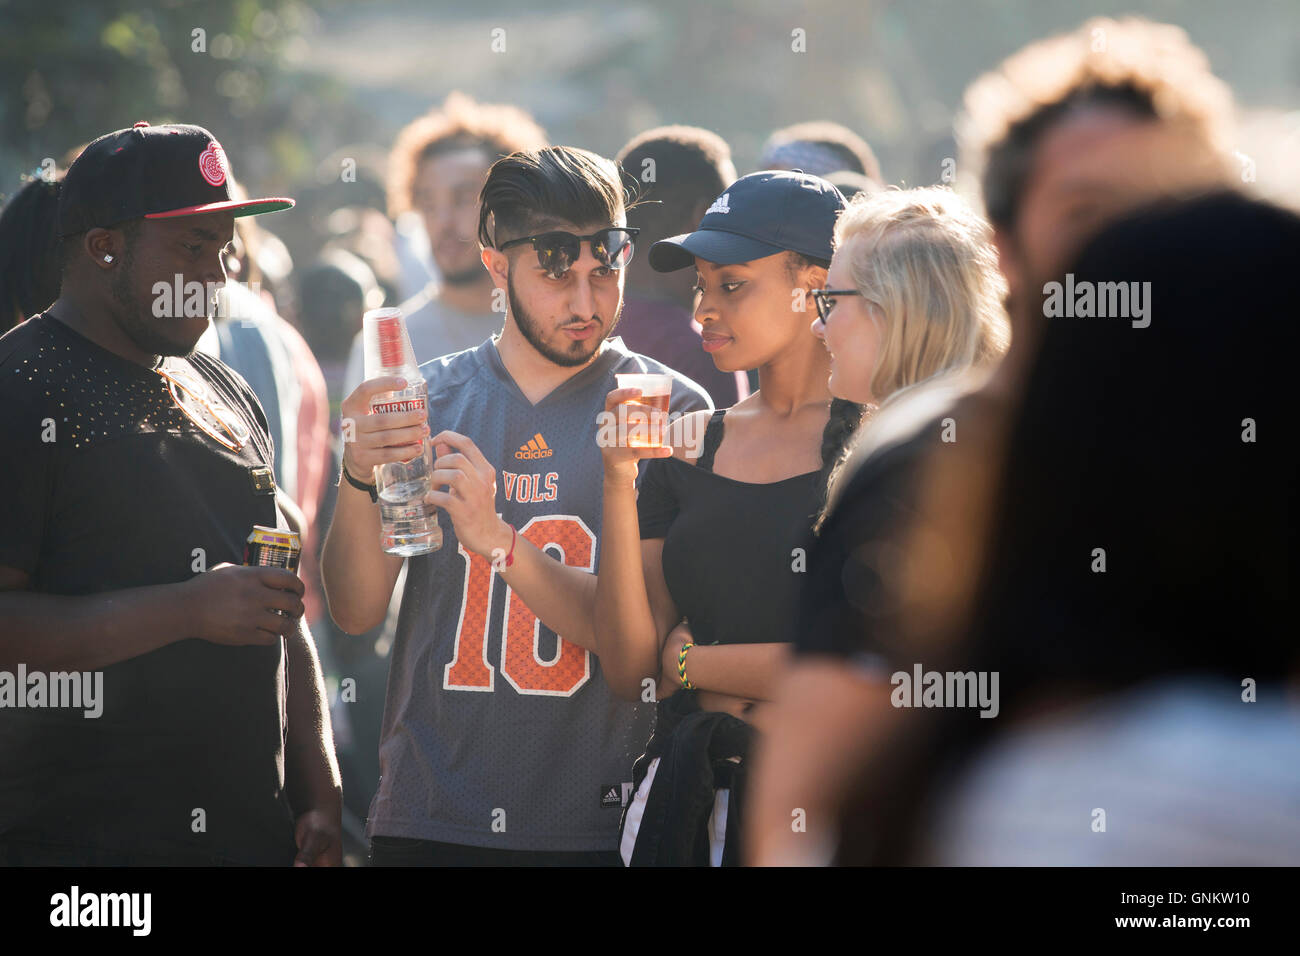 People drinking at The Notting Hill Carnival in London Stock Photo